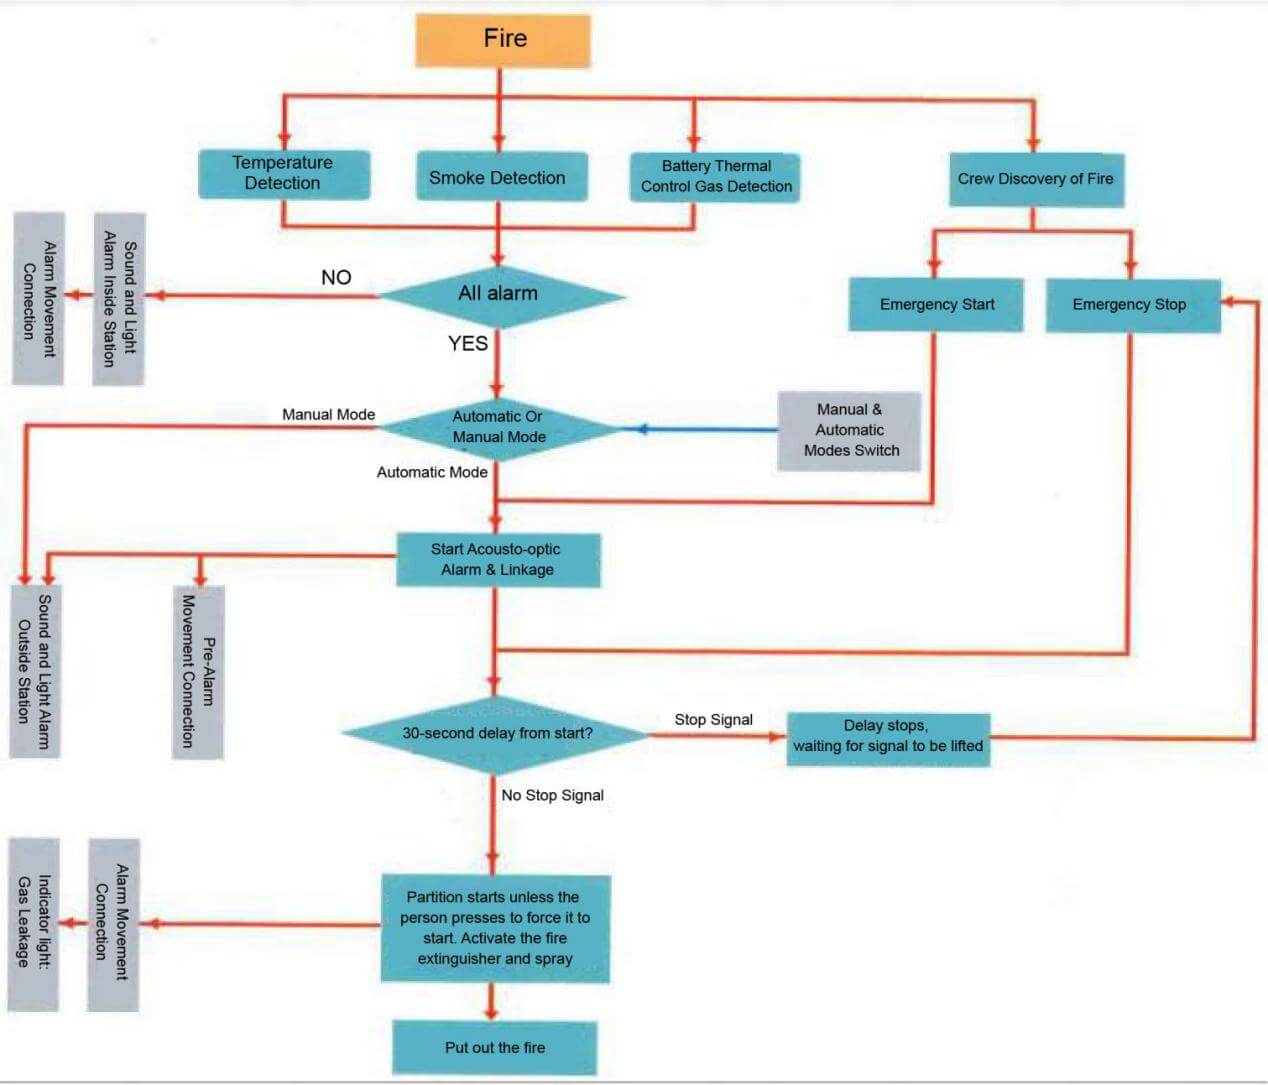 The flow chart of fire fighting system